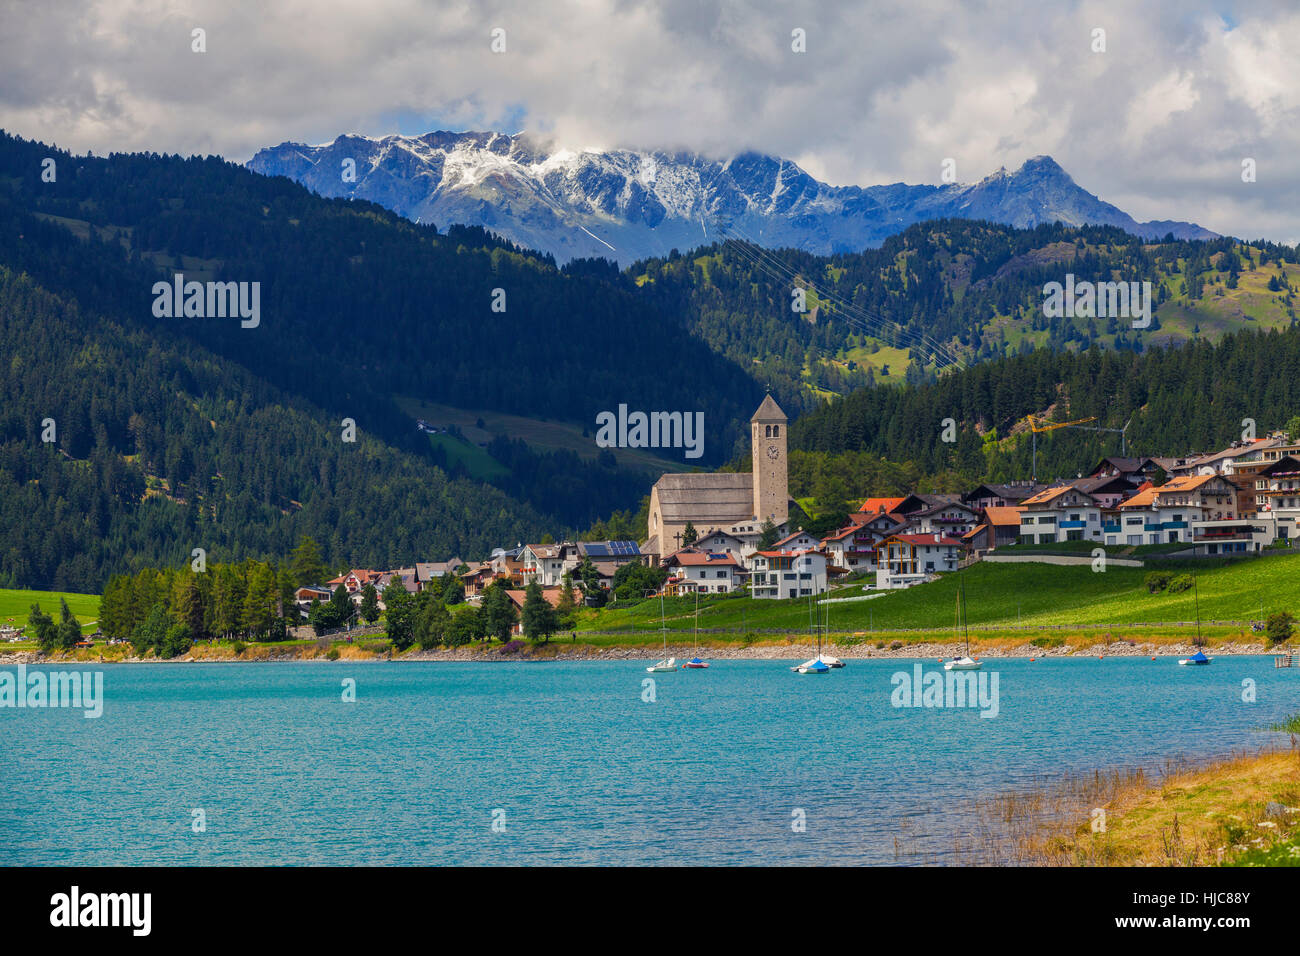 Landscape view of lake and village in Vinschgau Valley, South Tyrol, Italy Stock Photo